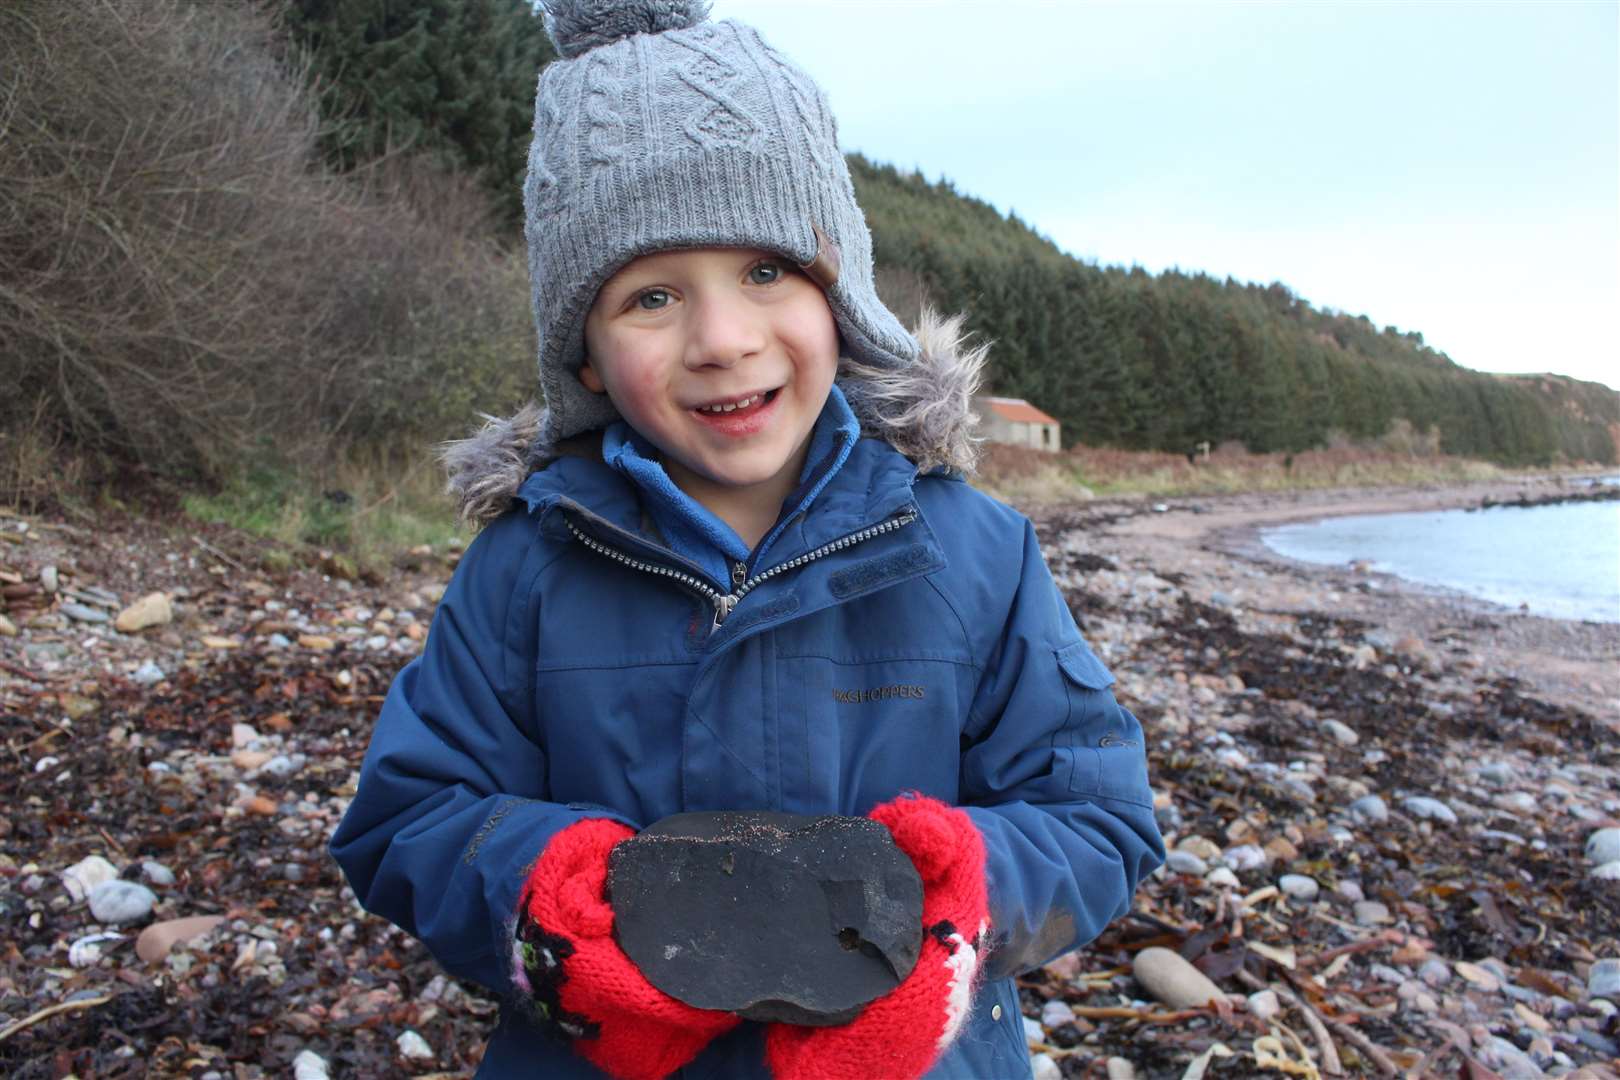 Matthew with his first fossil find.